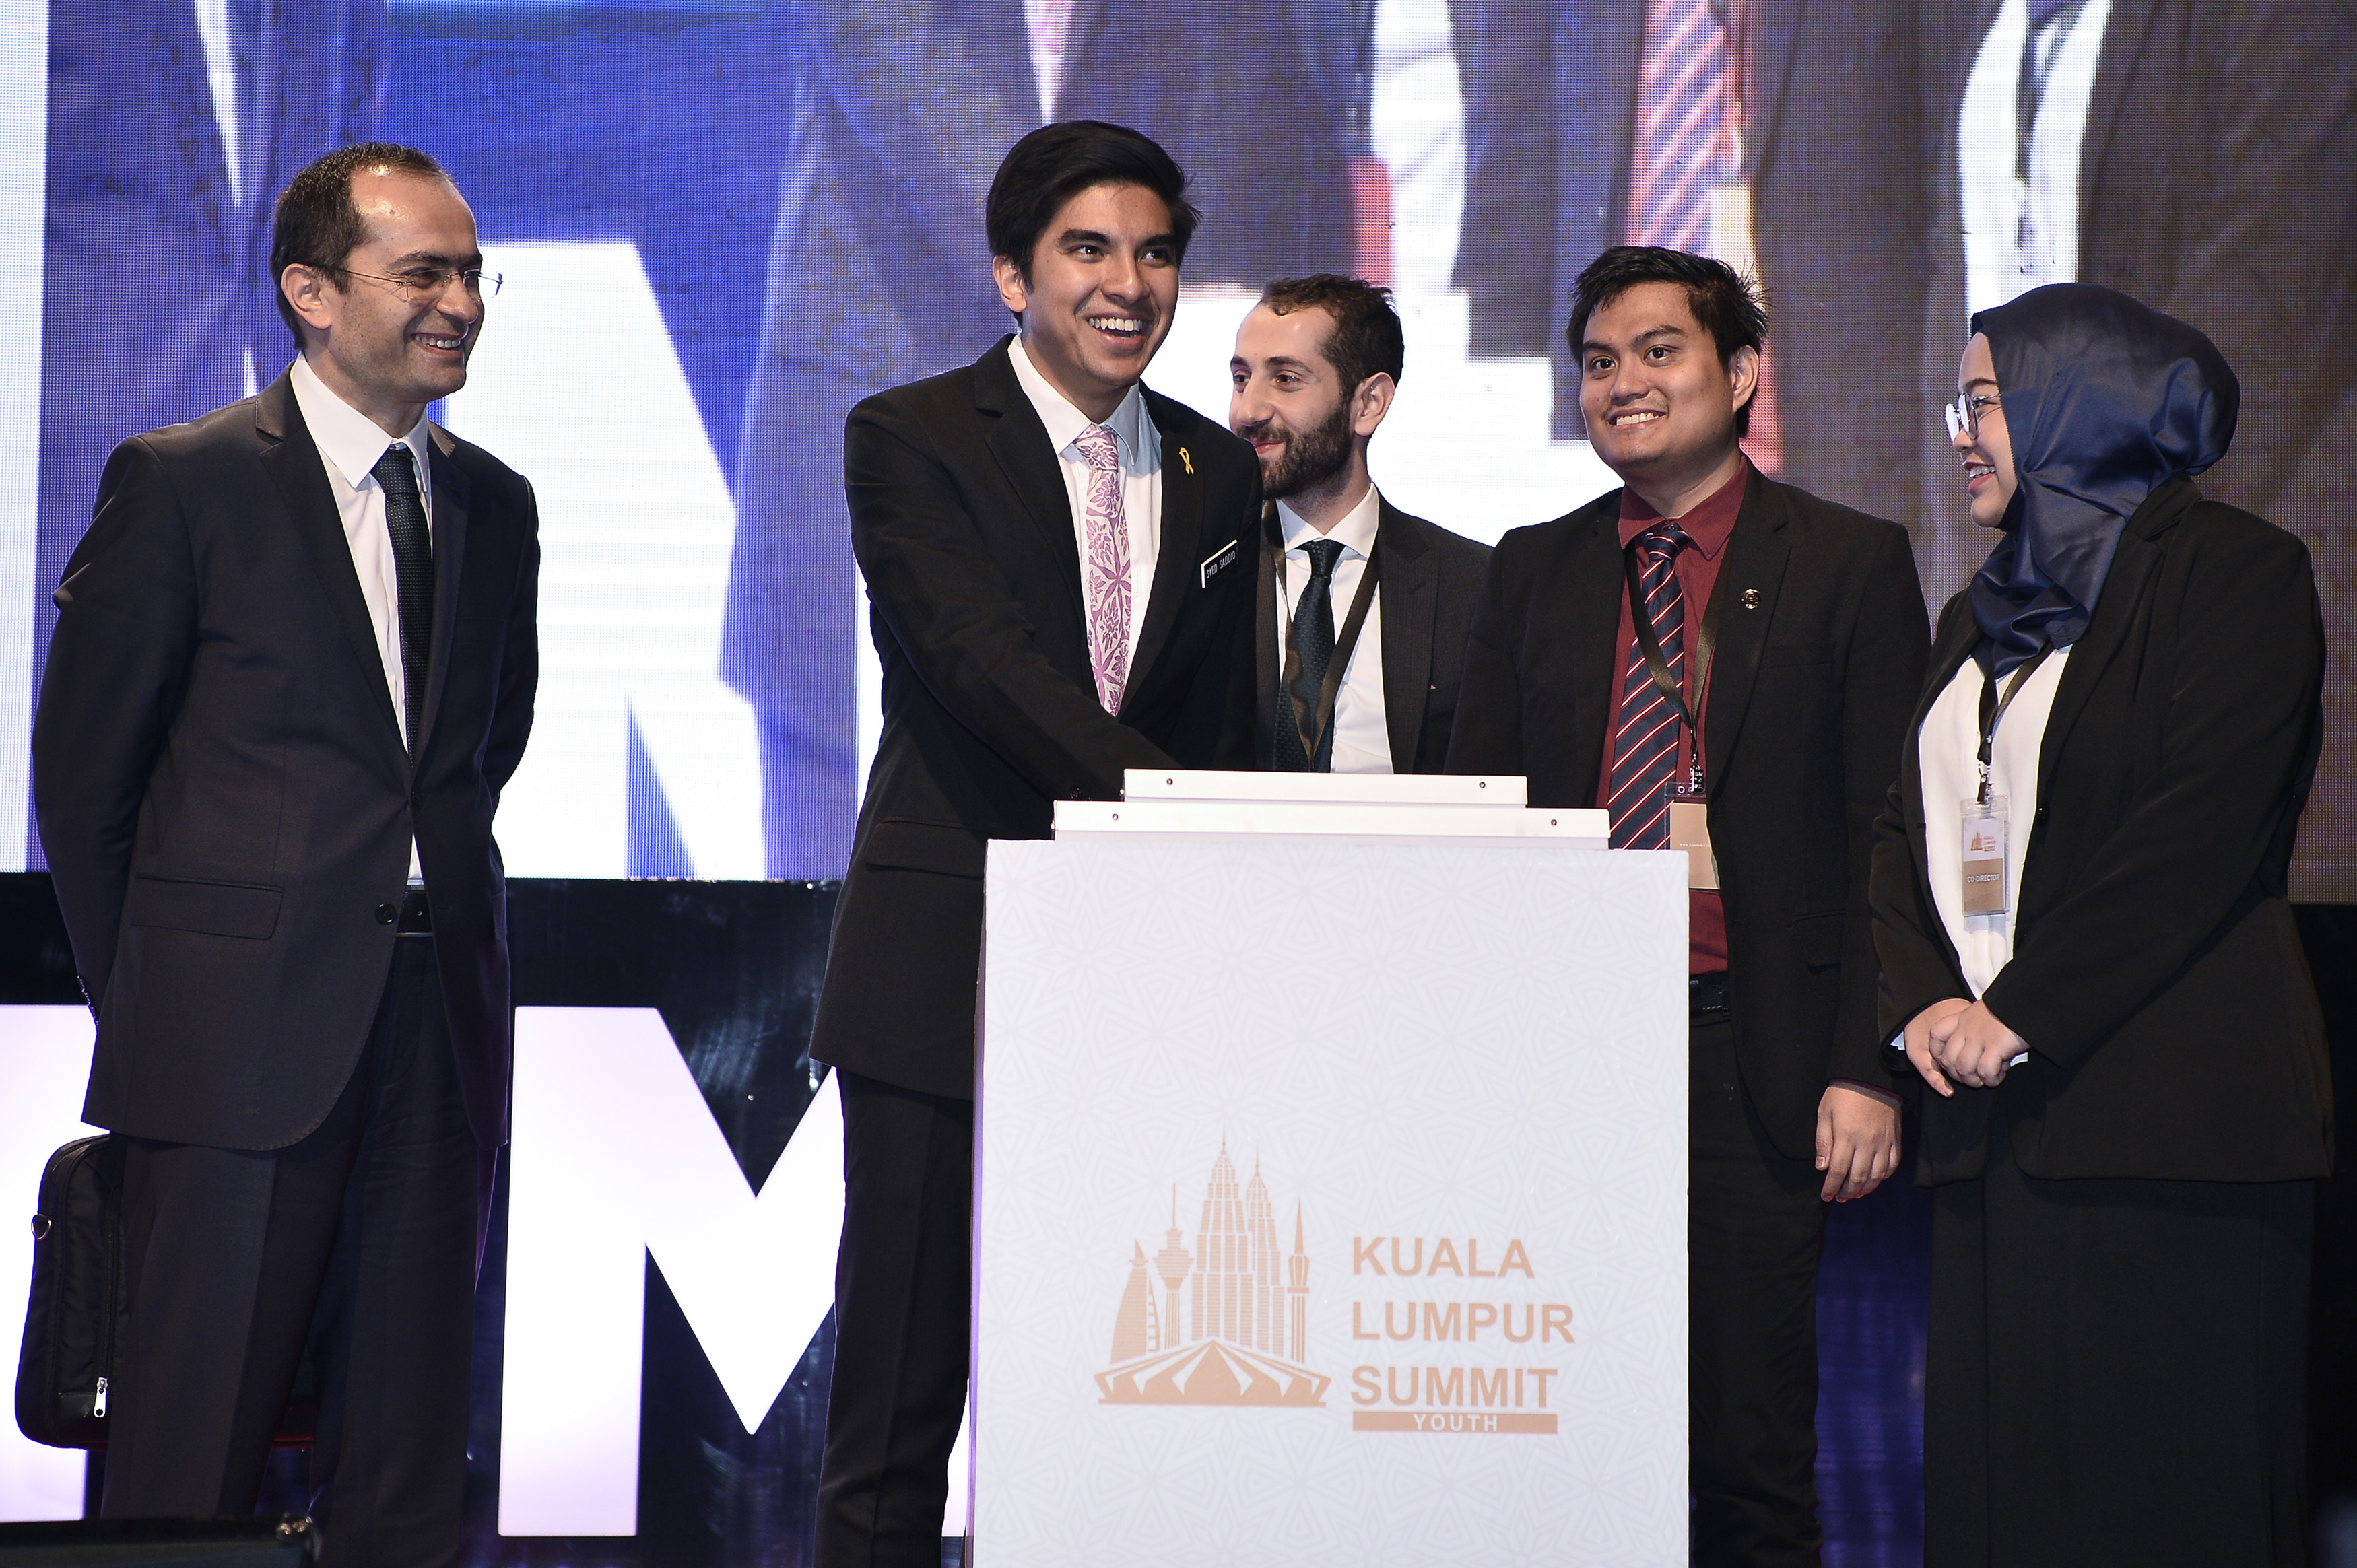 Turkey keen to work with Malaysia on youth volunteerism